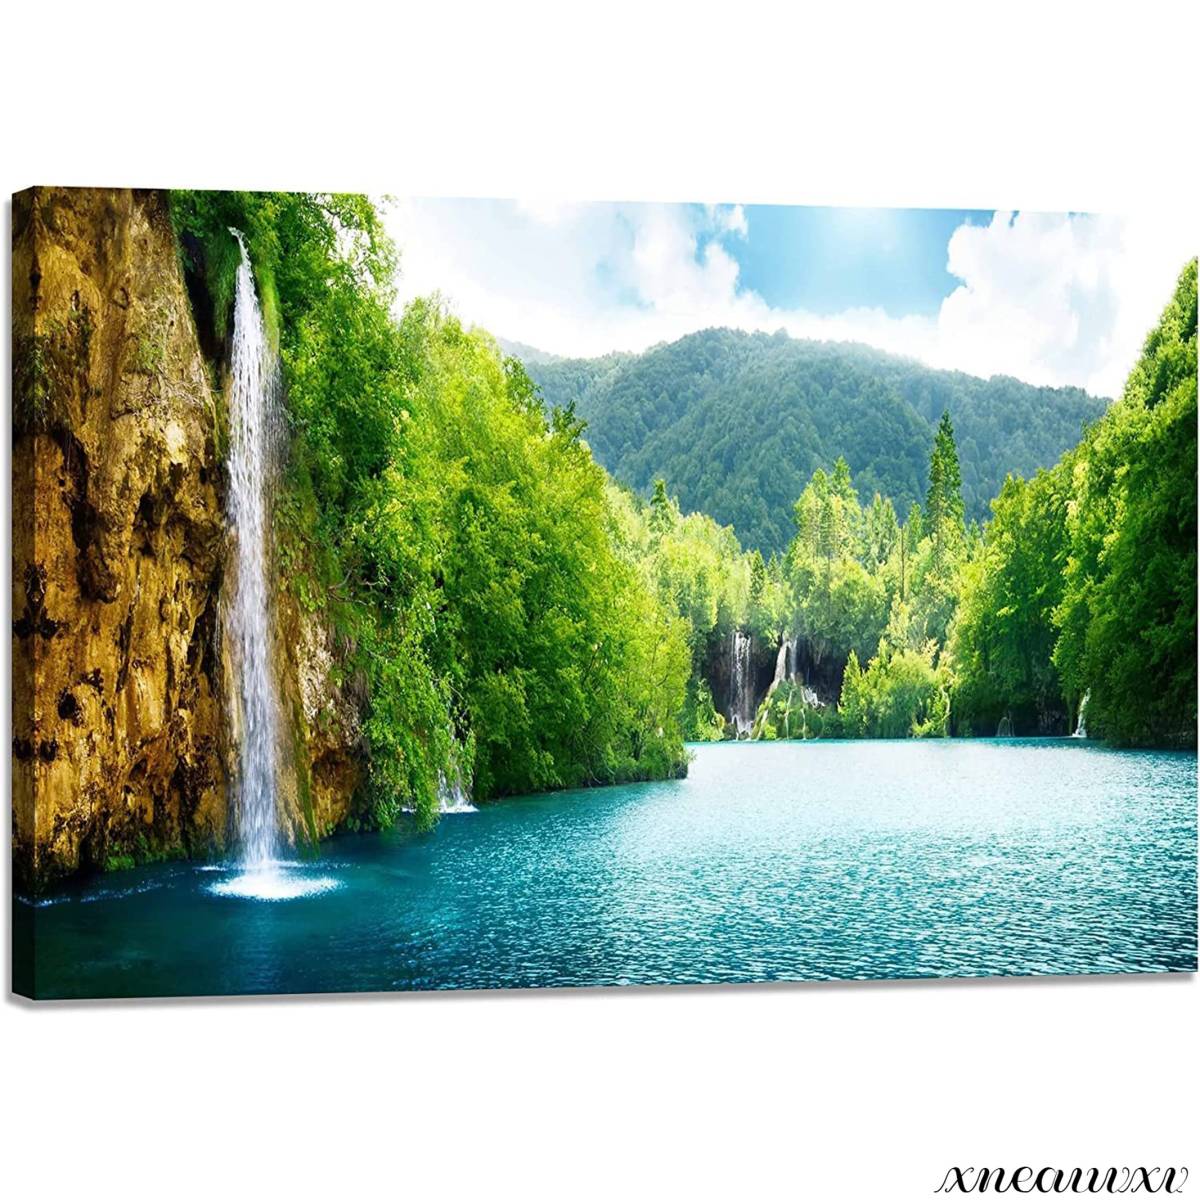 Natural scenery, art panel, waterfall, interior, landscape, wall hanging, room decoration, decorative painting, canvas, painting, stylish, good luck, overseas art, appreciation, redecoration, Artwork, Painting, graphic